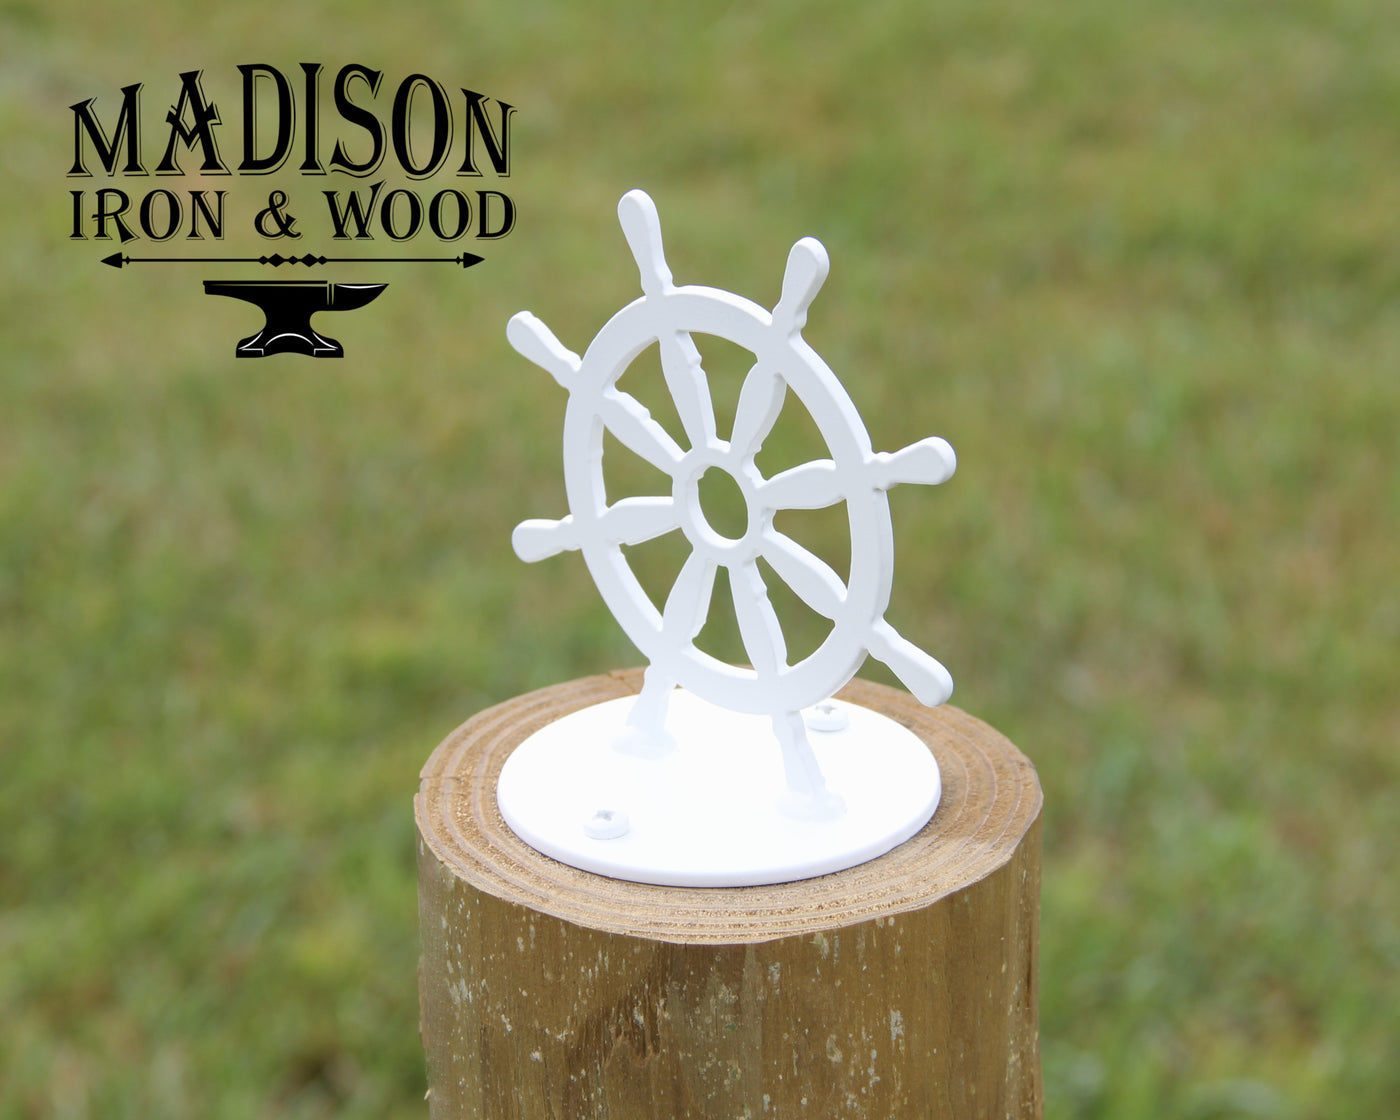 Ship Wheel Post Top For Round Wood Fence Post - Madison Iron and Wood - Post Cap - metal outdoor decor - Steel deocrations - american made products - veteran owned business products - fencing decorations - fencing supplies - custom wall decorations - personalized wall signs - steel - decorative post caps - steel post caps - metal post caps - brackets - structural brackets - home improvement - easter - easter decorations - easter gift - easter yard decor